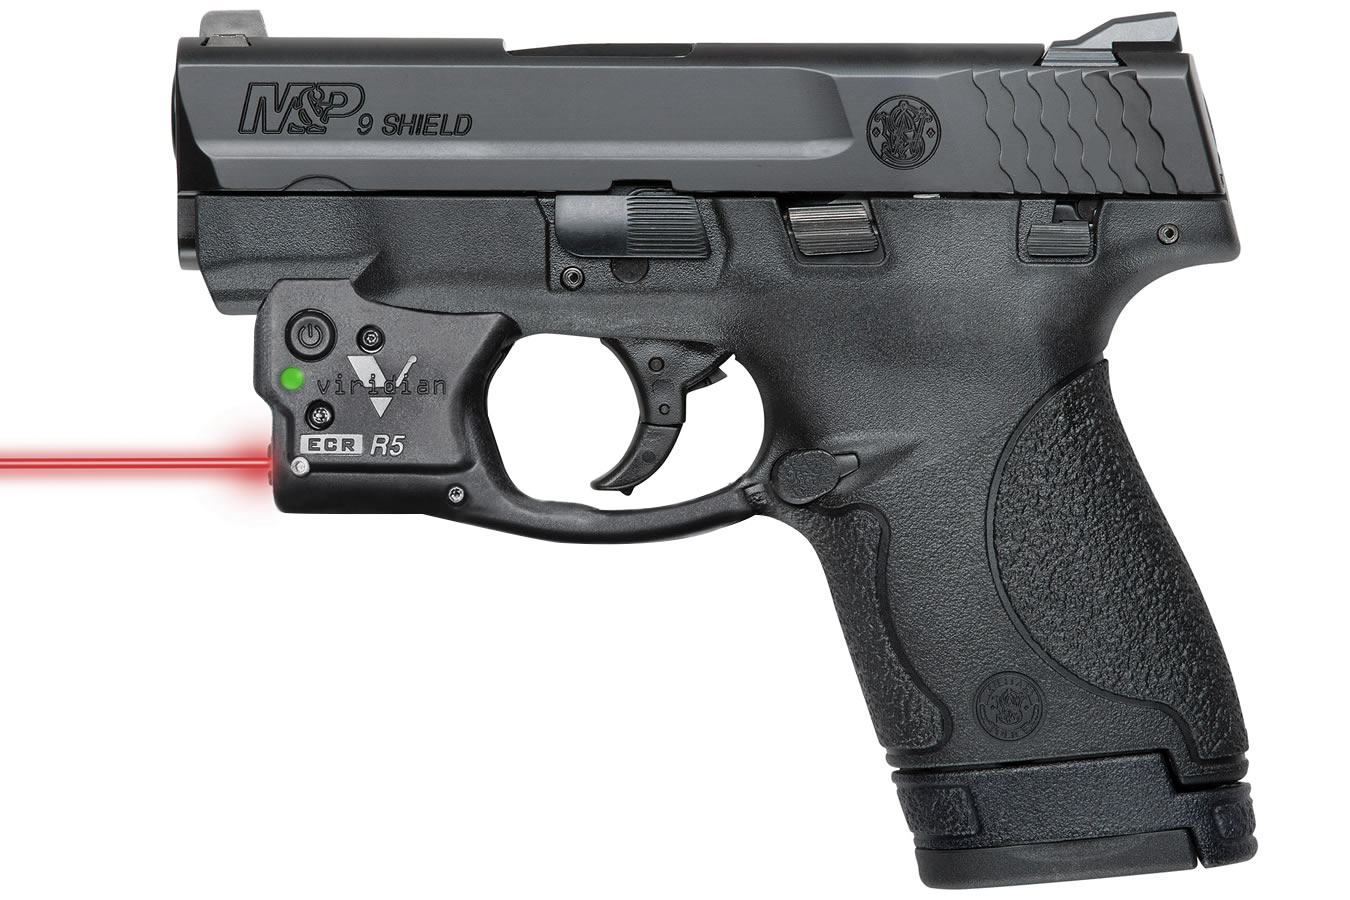 smith-wesson-m-p9-shield-9mm-centerfire-pistol-with-thumb-safety-and